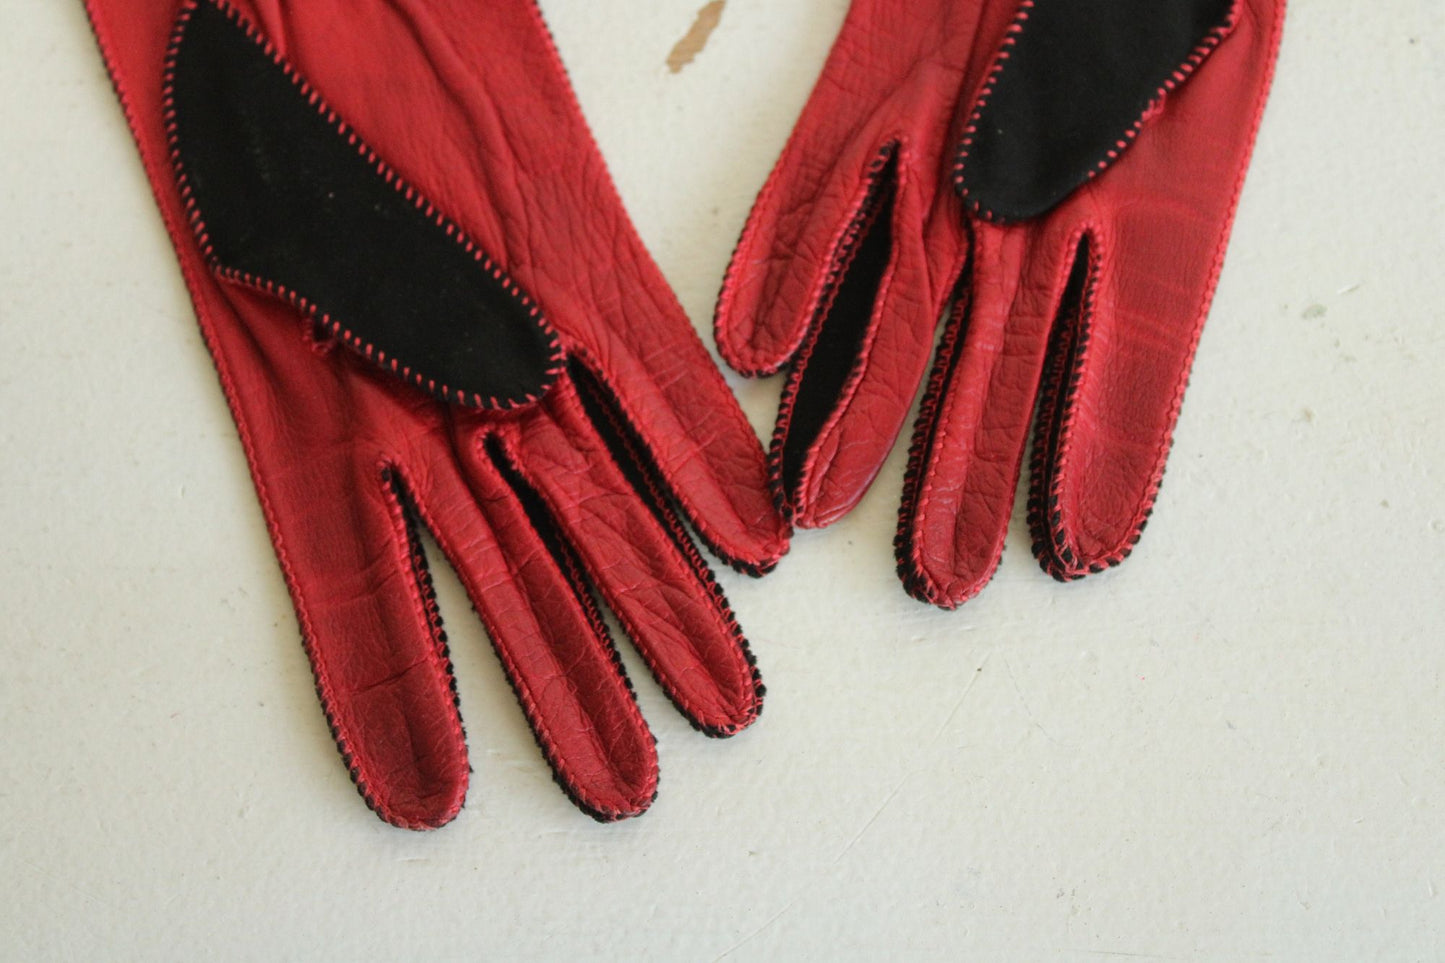 Vintage 1950s 1960s Leather Gloves by Lilly Dache Size 7